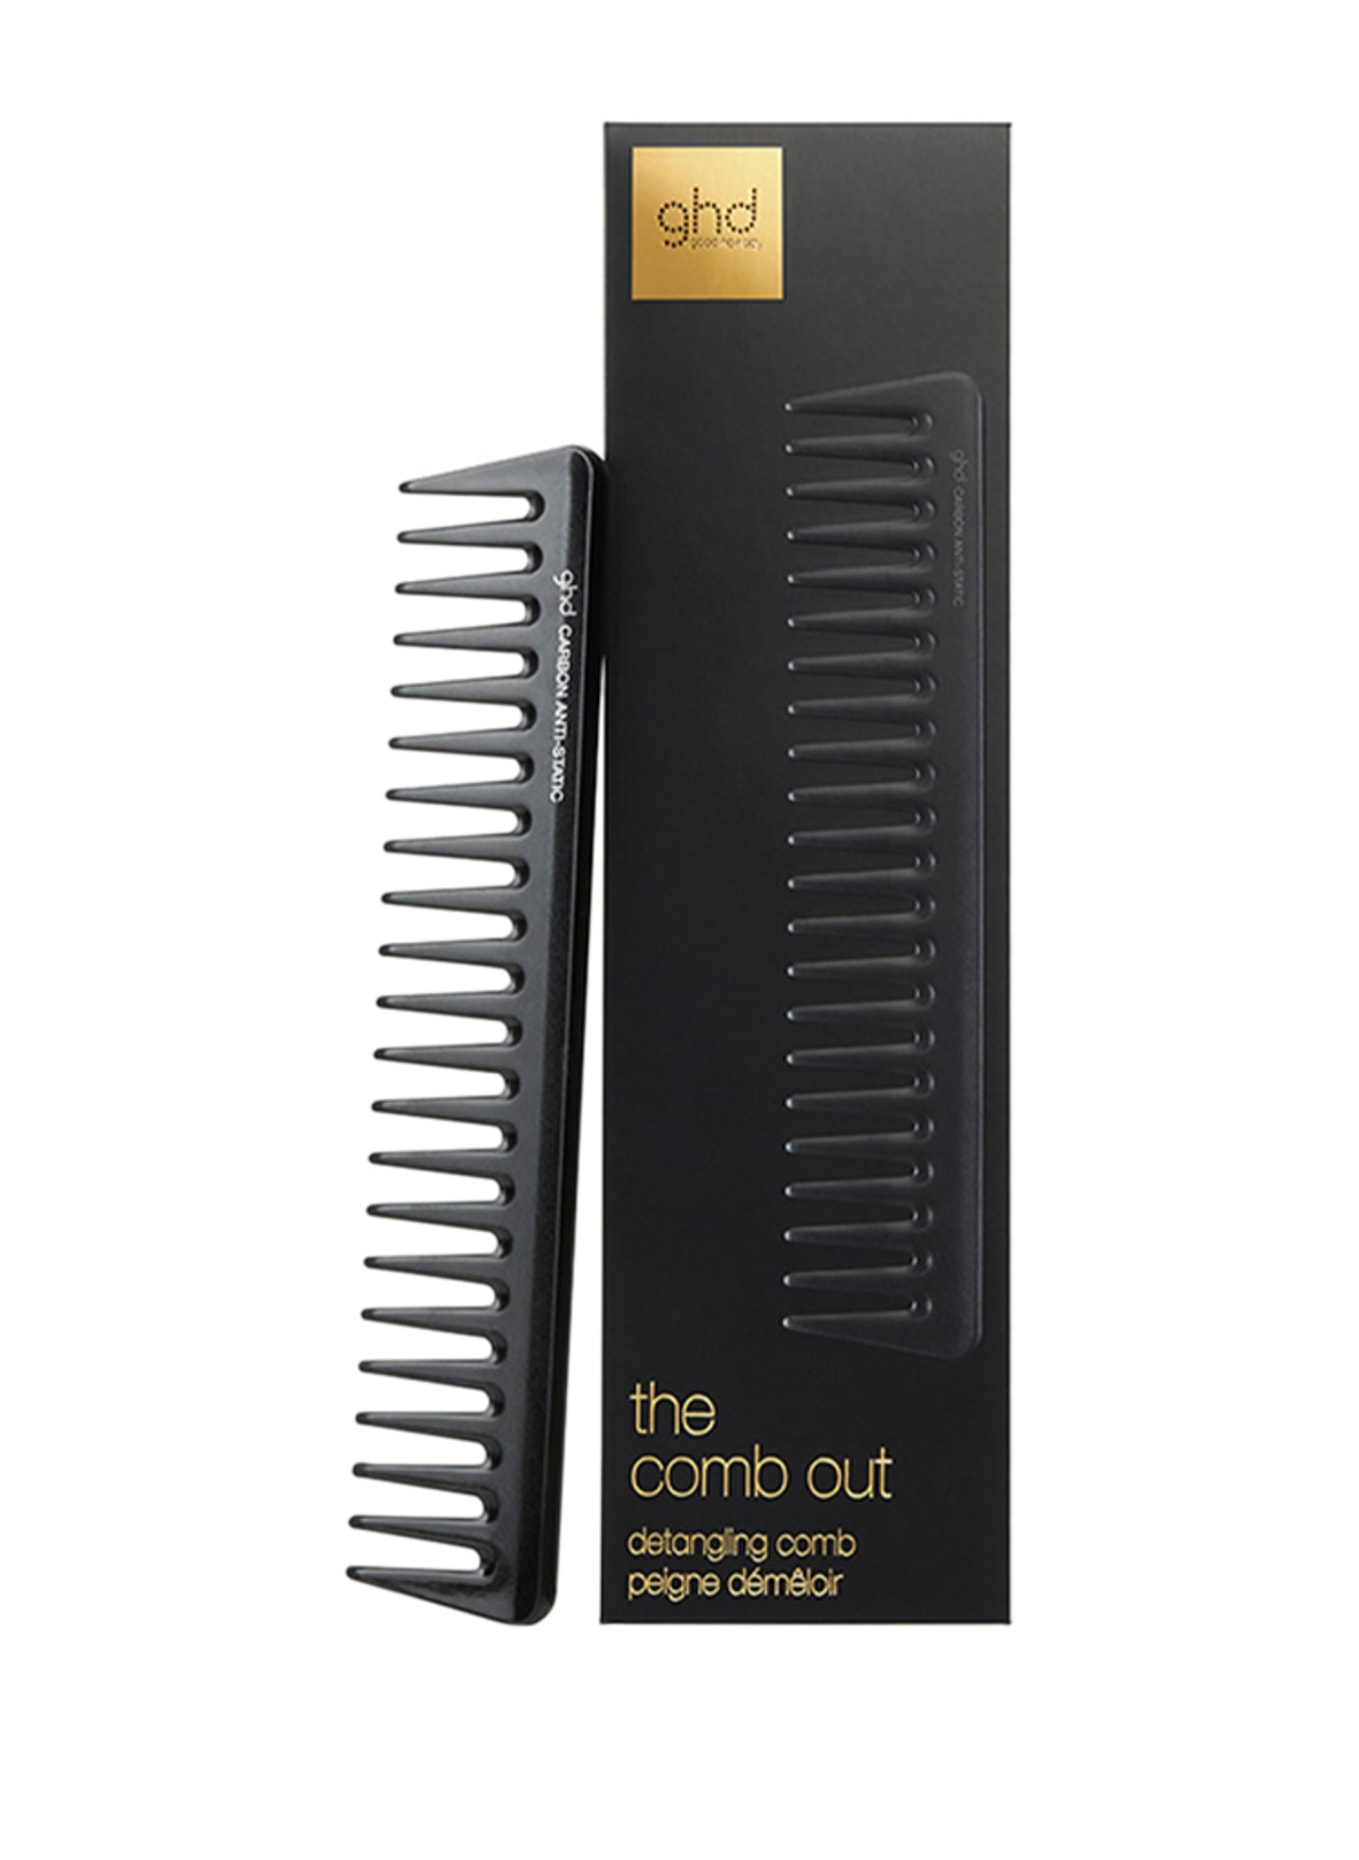 ghd THE COMB OUT (Bild 2)